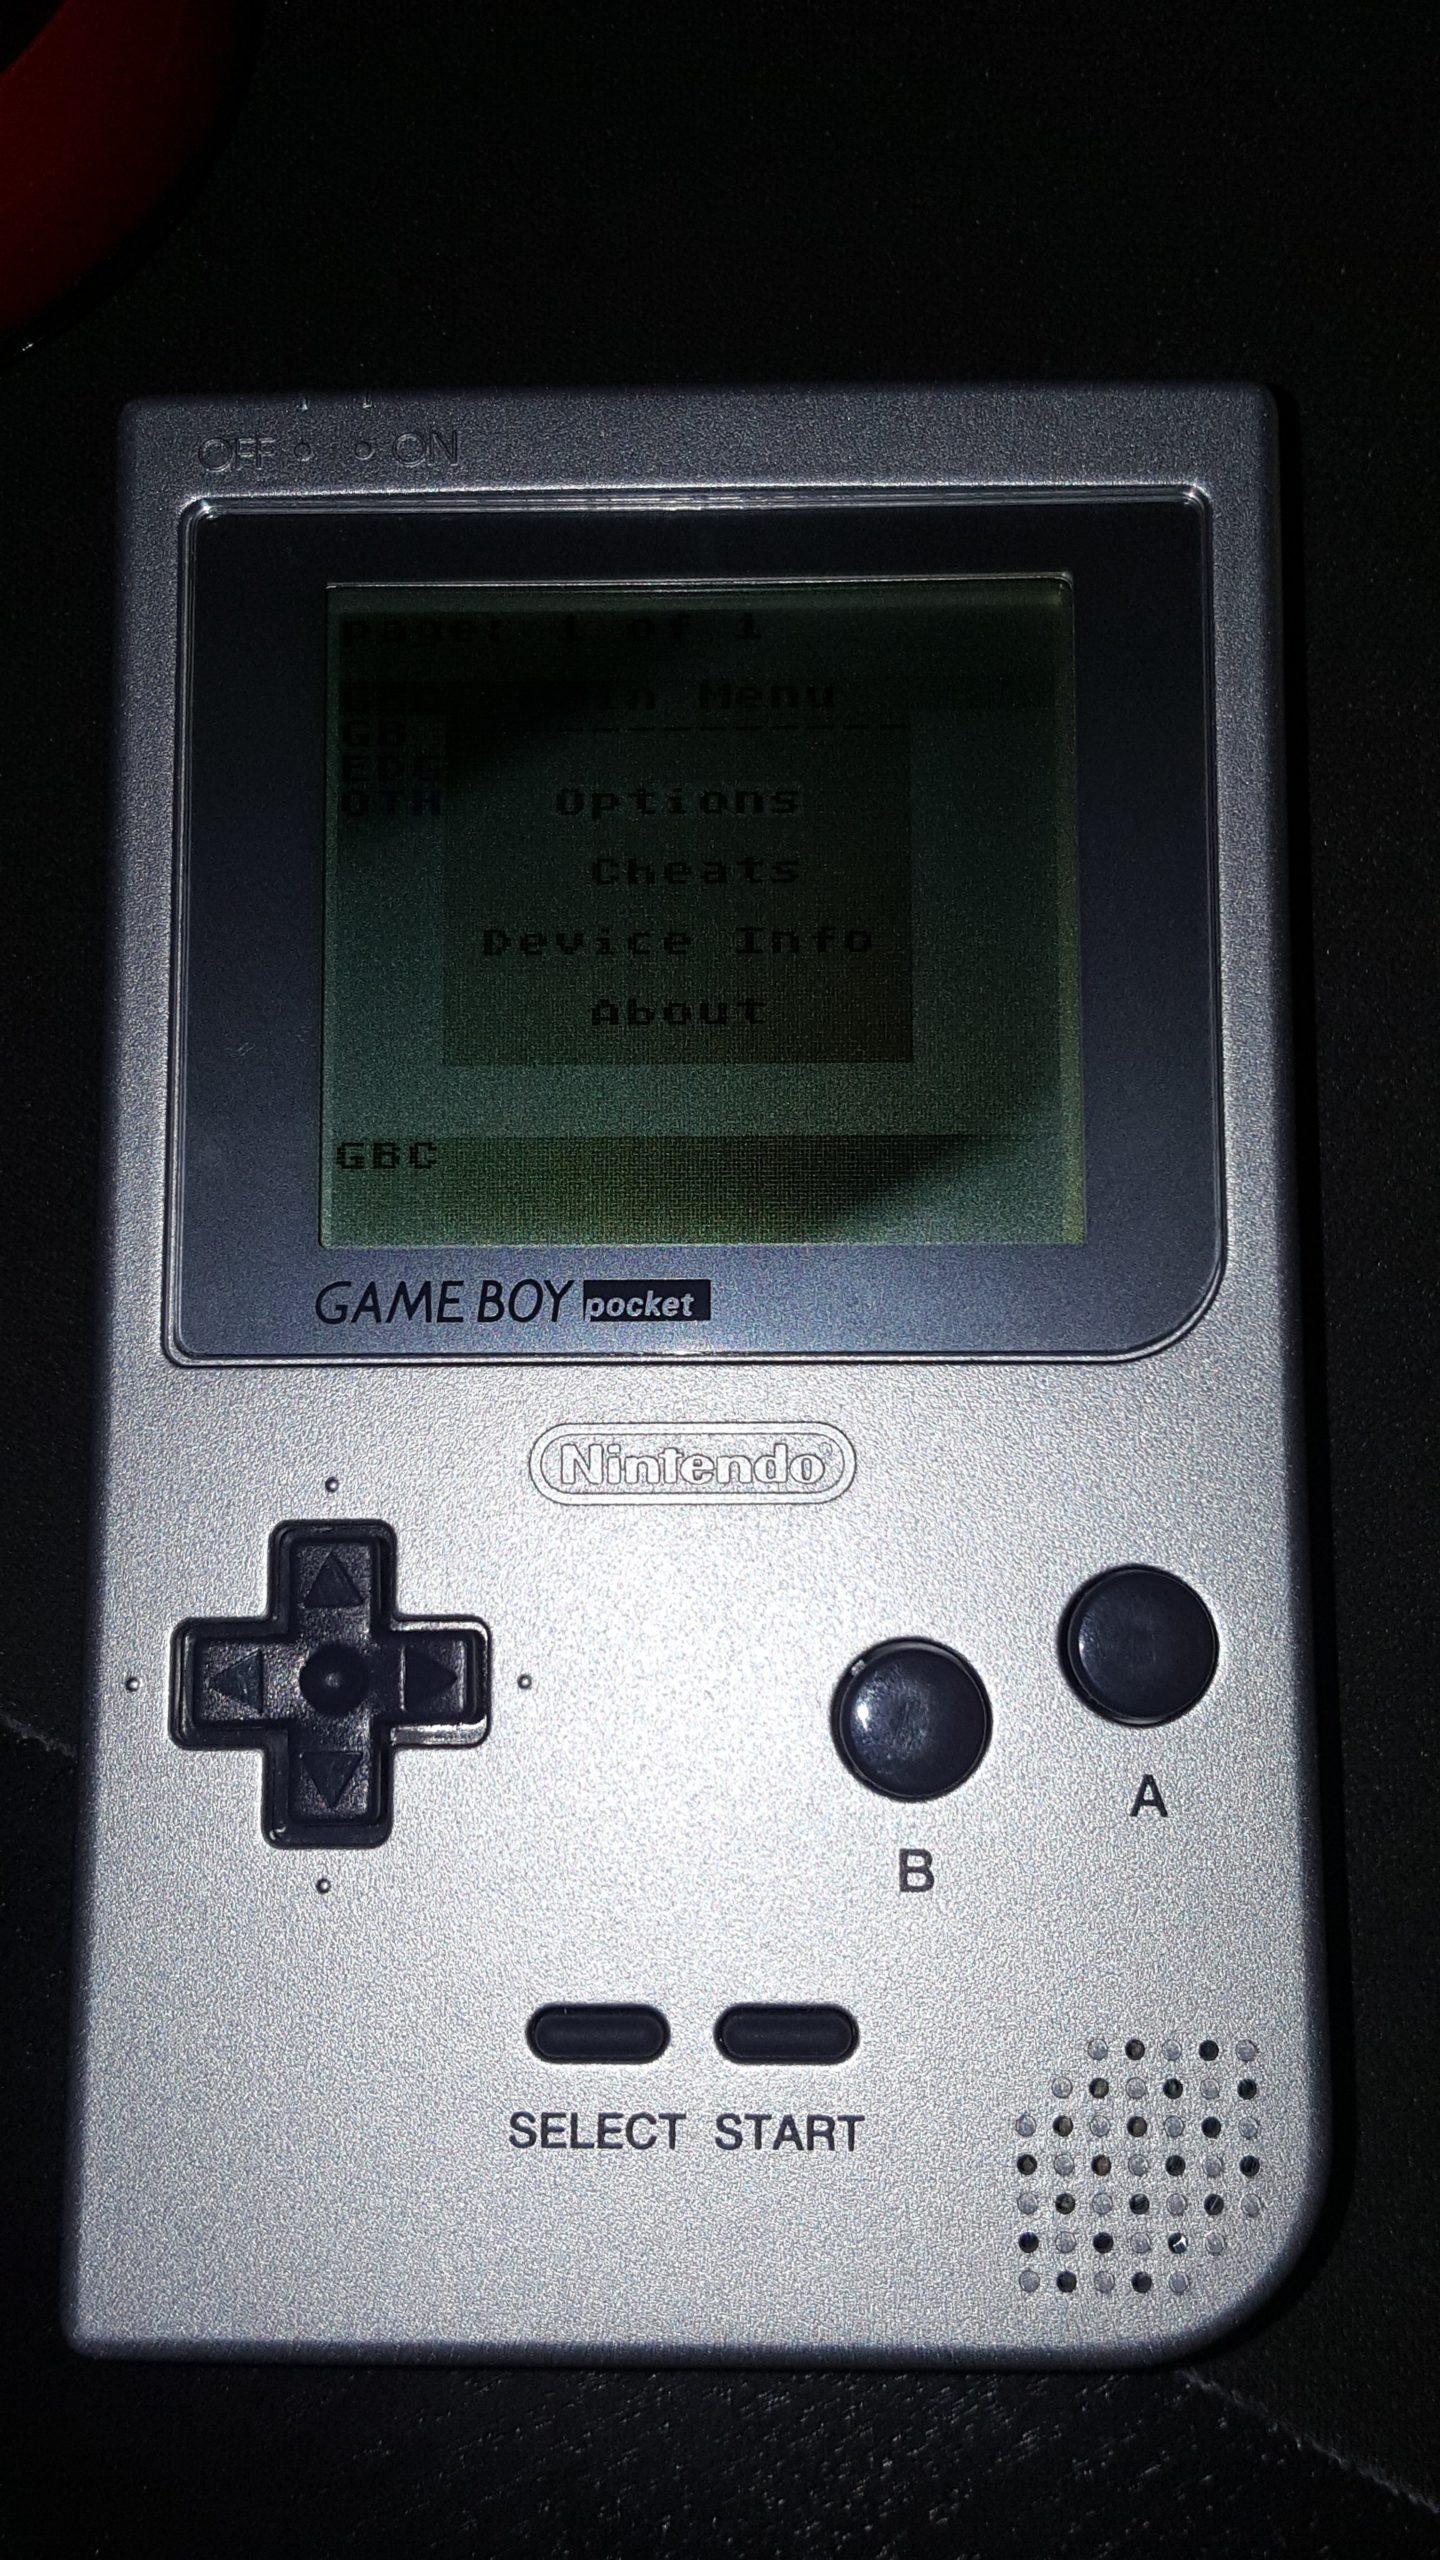 Pokemon Gold Cheats & Cheat Codes for Game Boy Color - Cheat Code